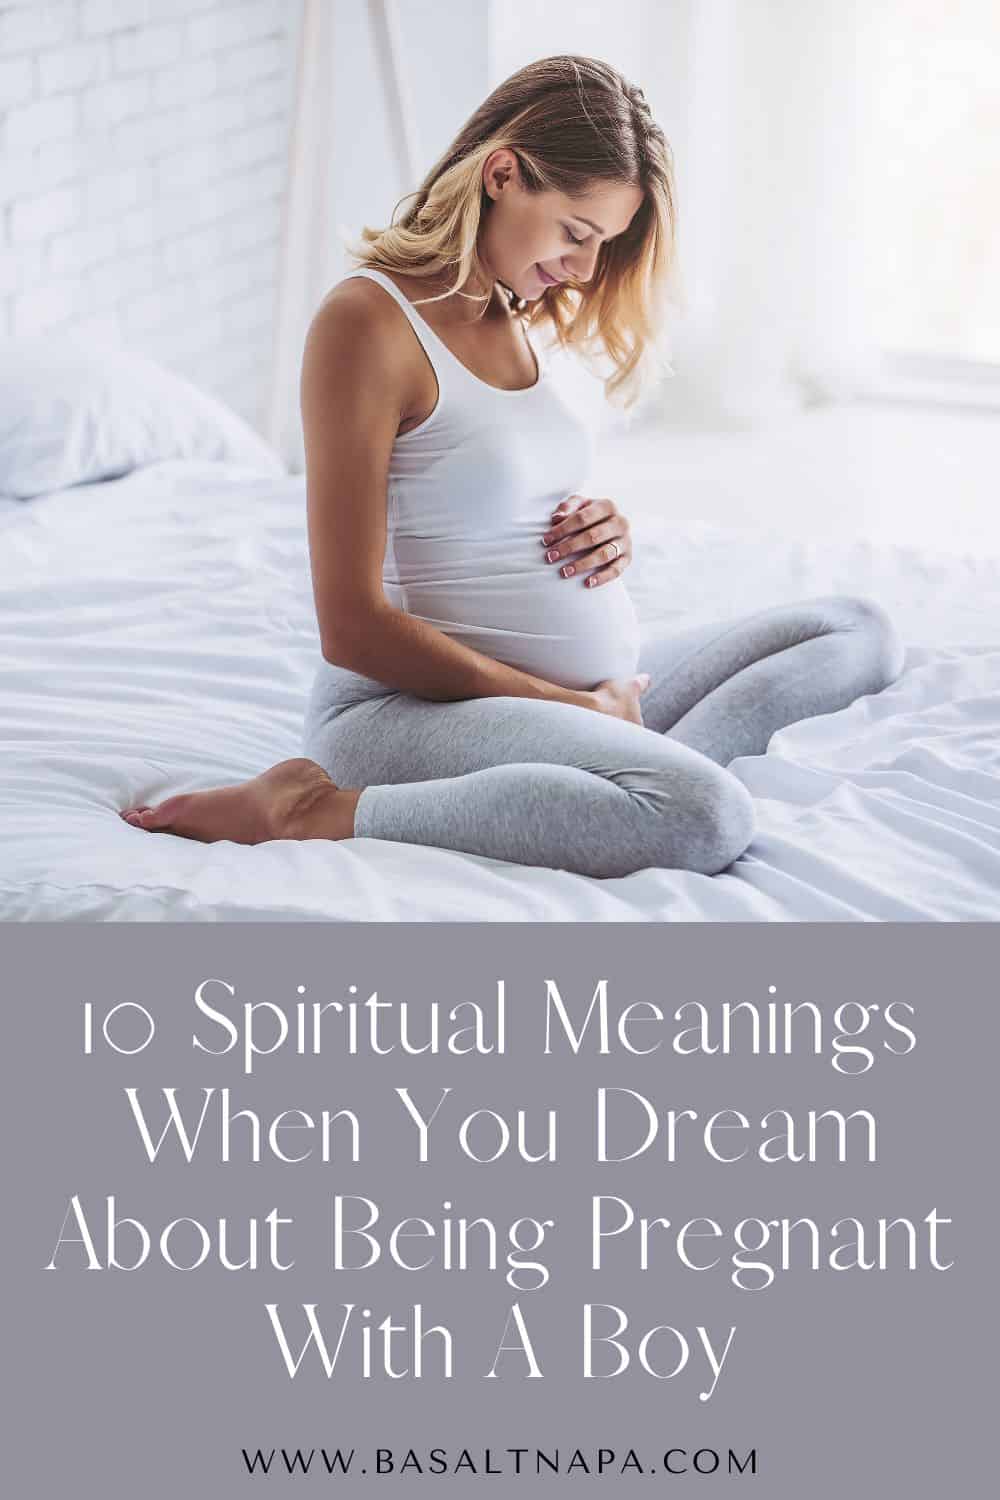 10 Spiritual Meanings When You Dream About Being Pregnant With A Boy